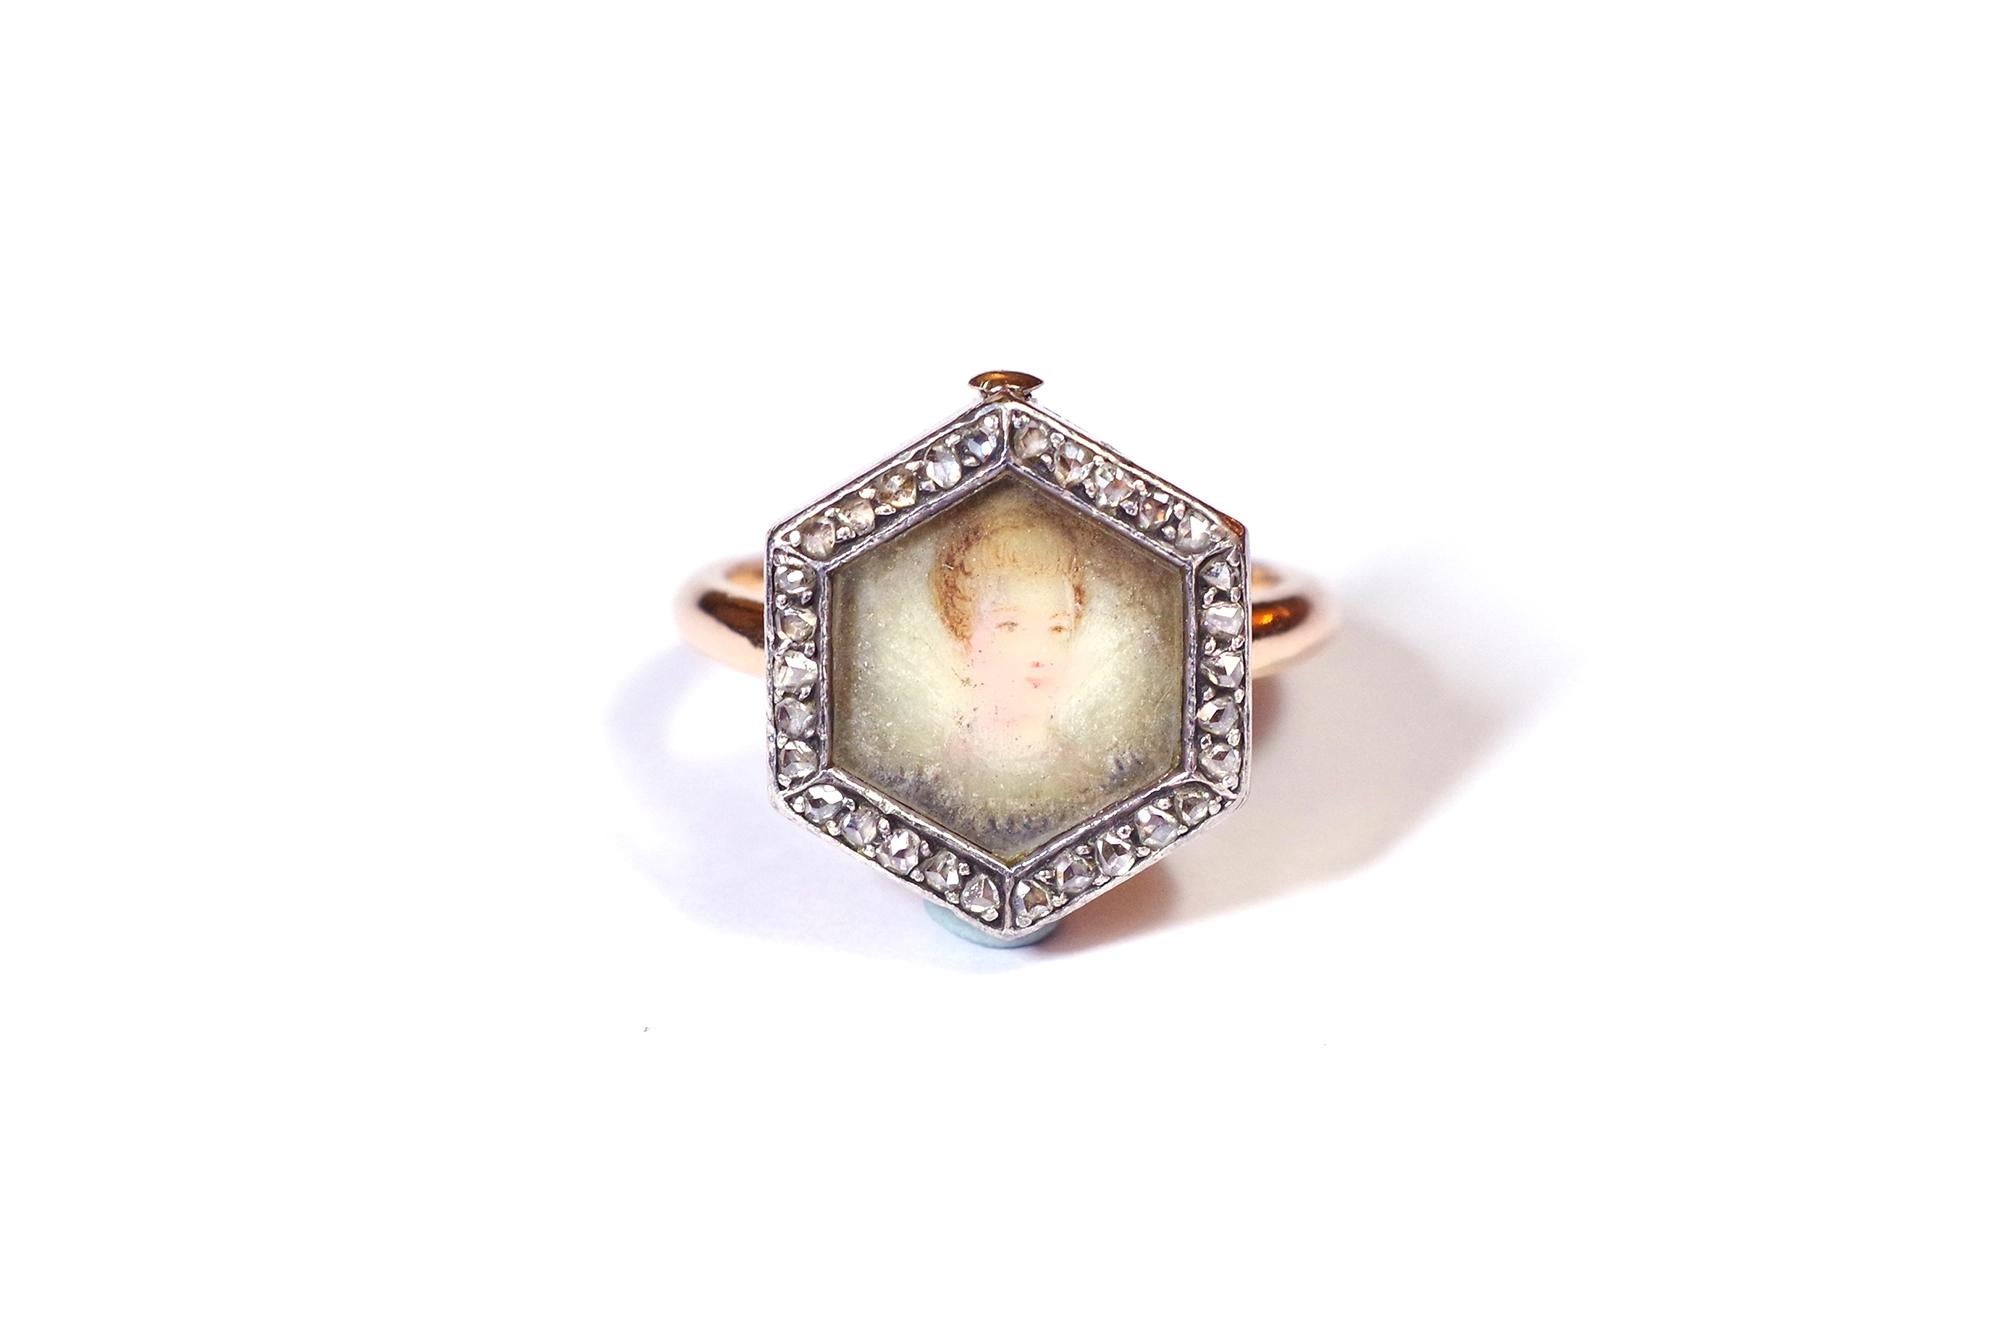 Georgian diamond portrait ring in rose gold 18 karats and silver 800 thousandth. Antique ring composed of a hexagonal bezel enclosing a lady's portrait. The miniature portrait is painted on organic matter, it is highlighted by a surround of thirty